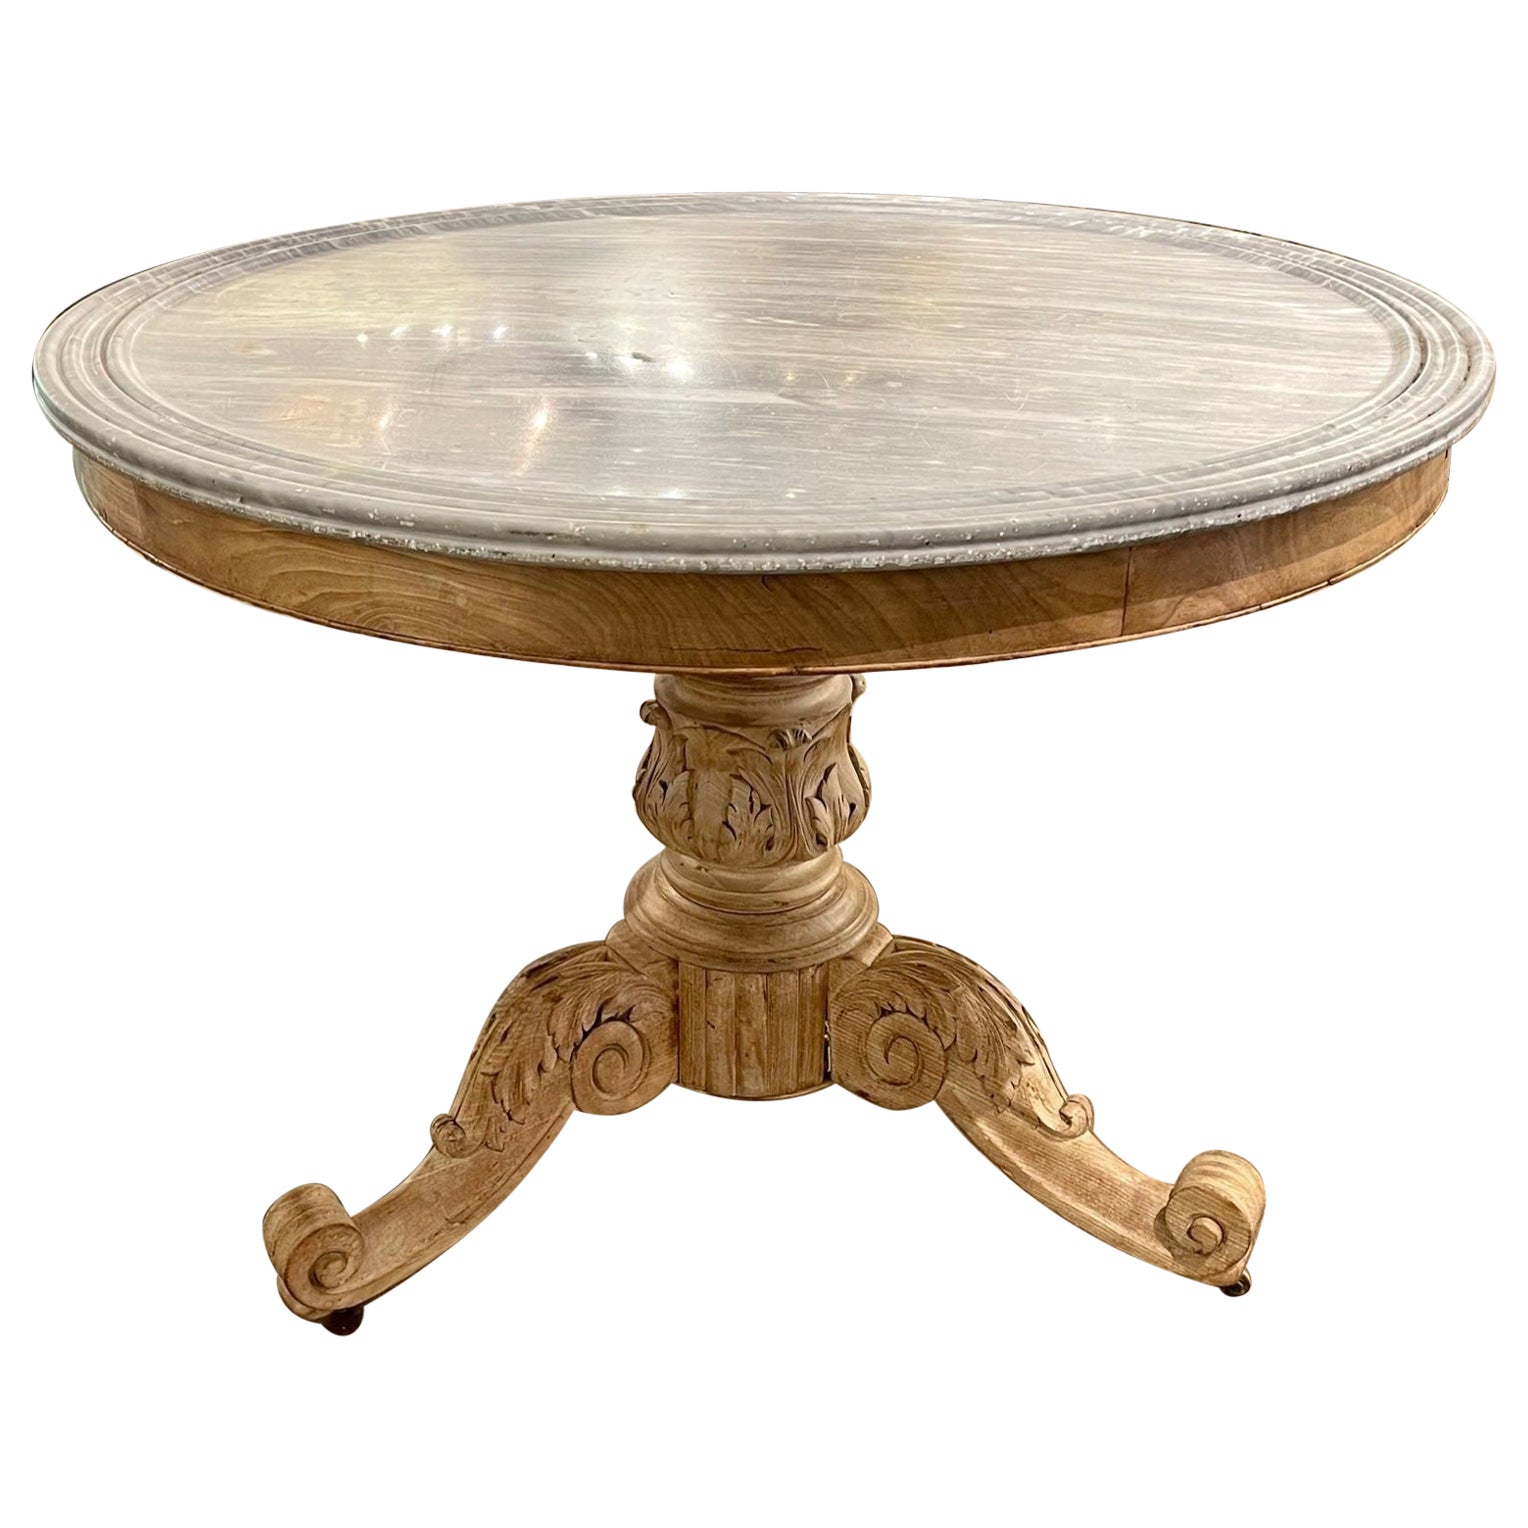 19th Century French Carved and Bleached Walnut Center Table